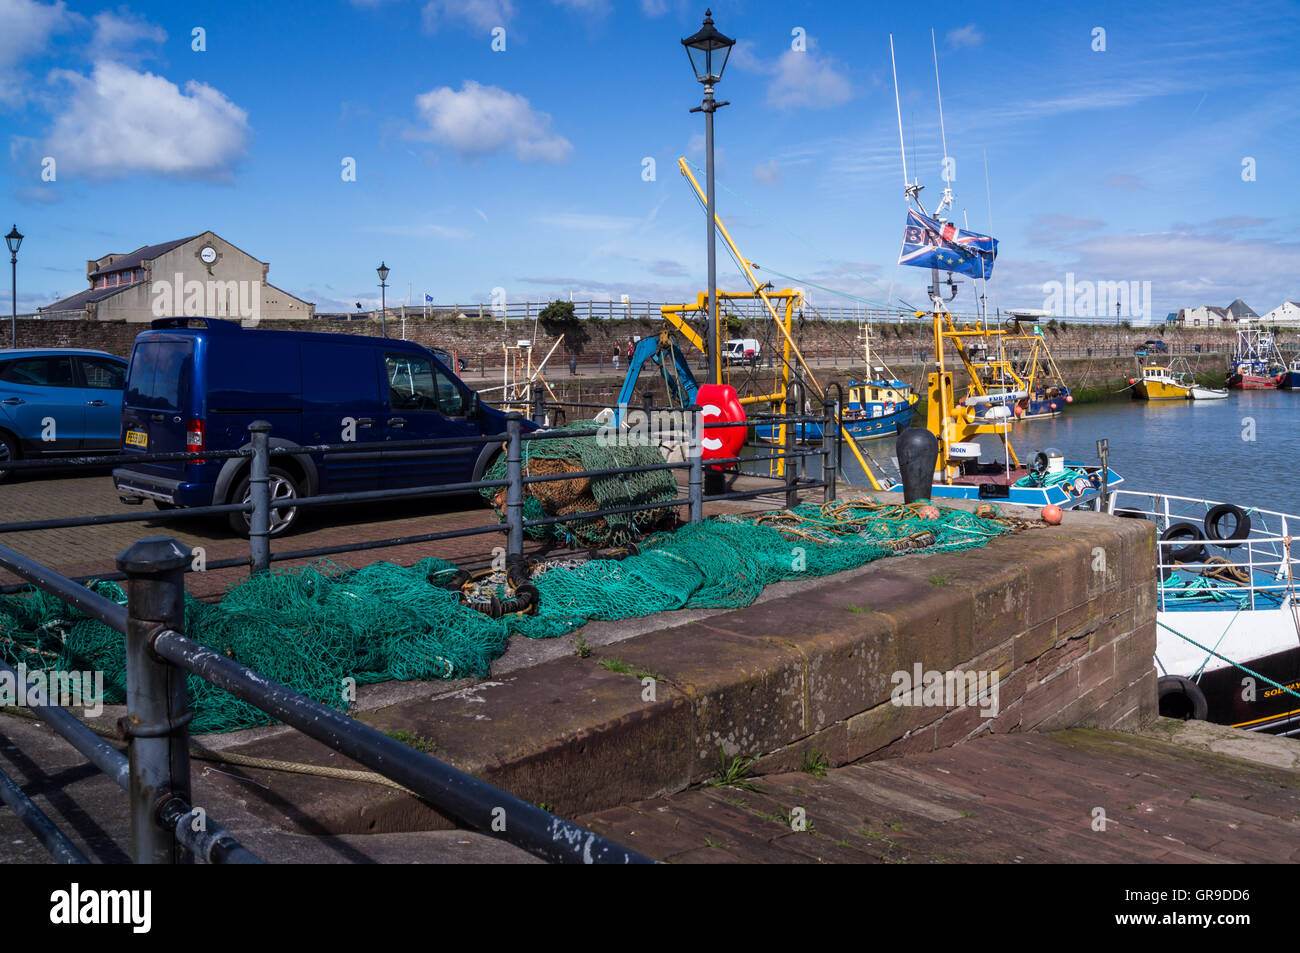 Fishing boat flying BREXIT flag in support of UK exit from EU, Maryport, Cumbria, England Stock Photo